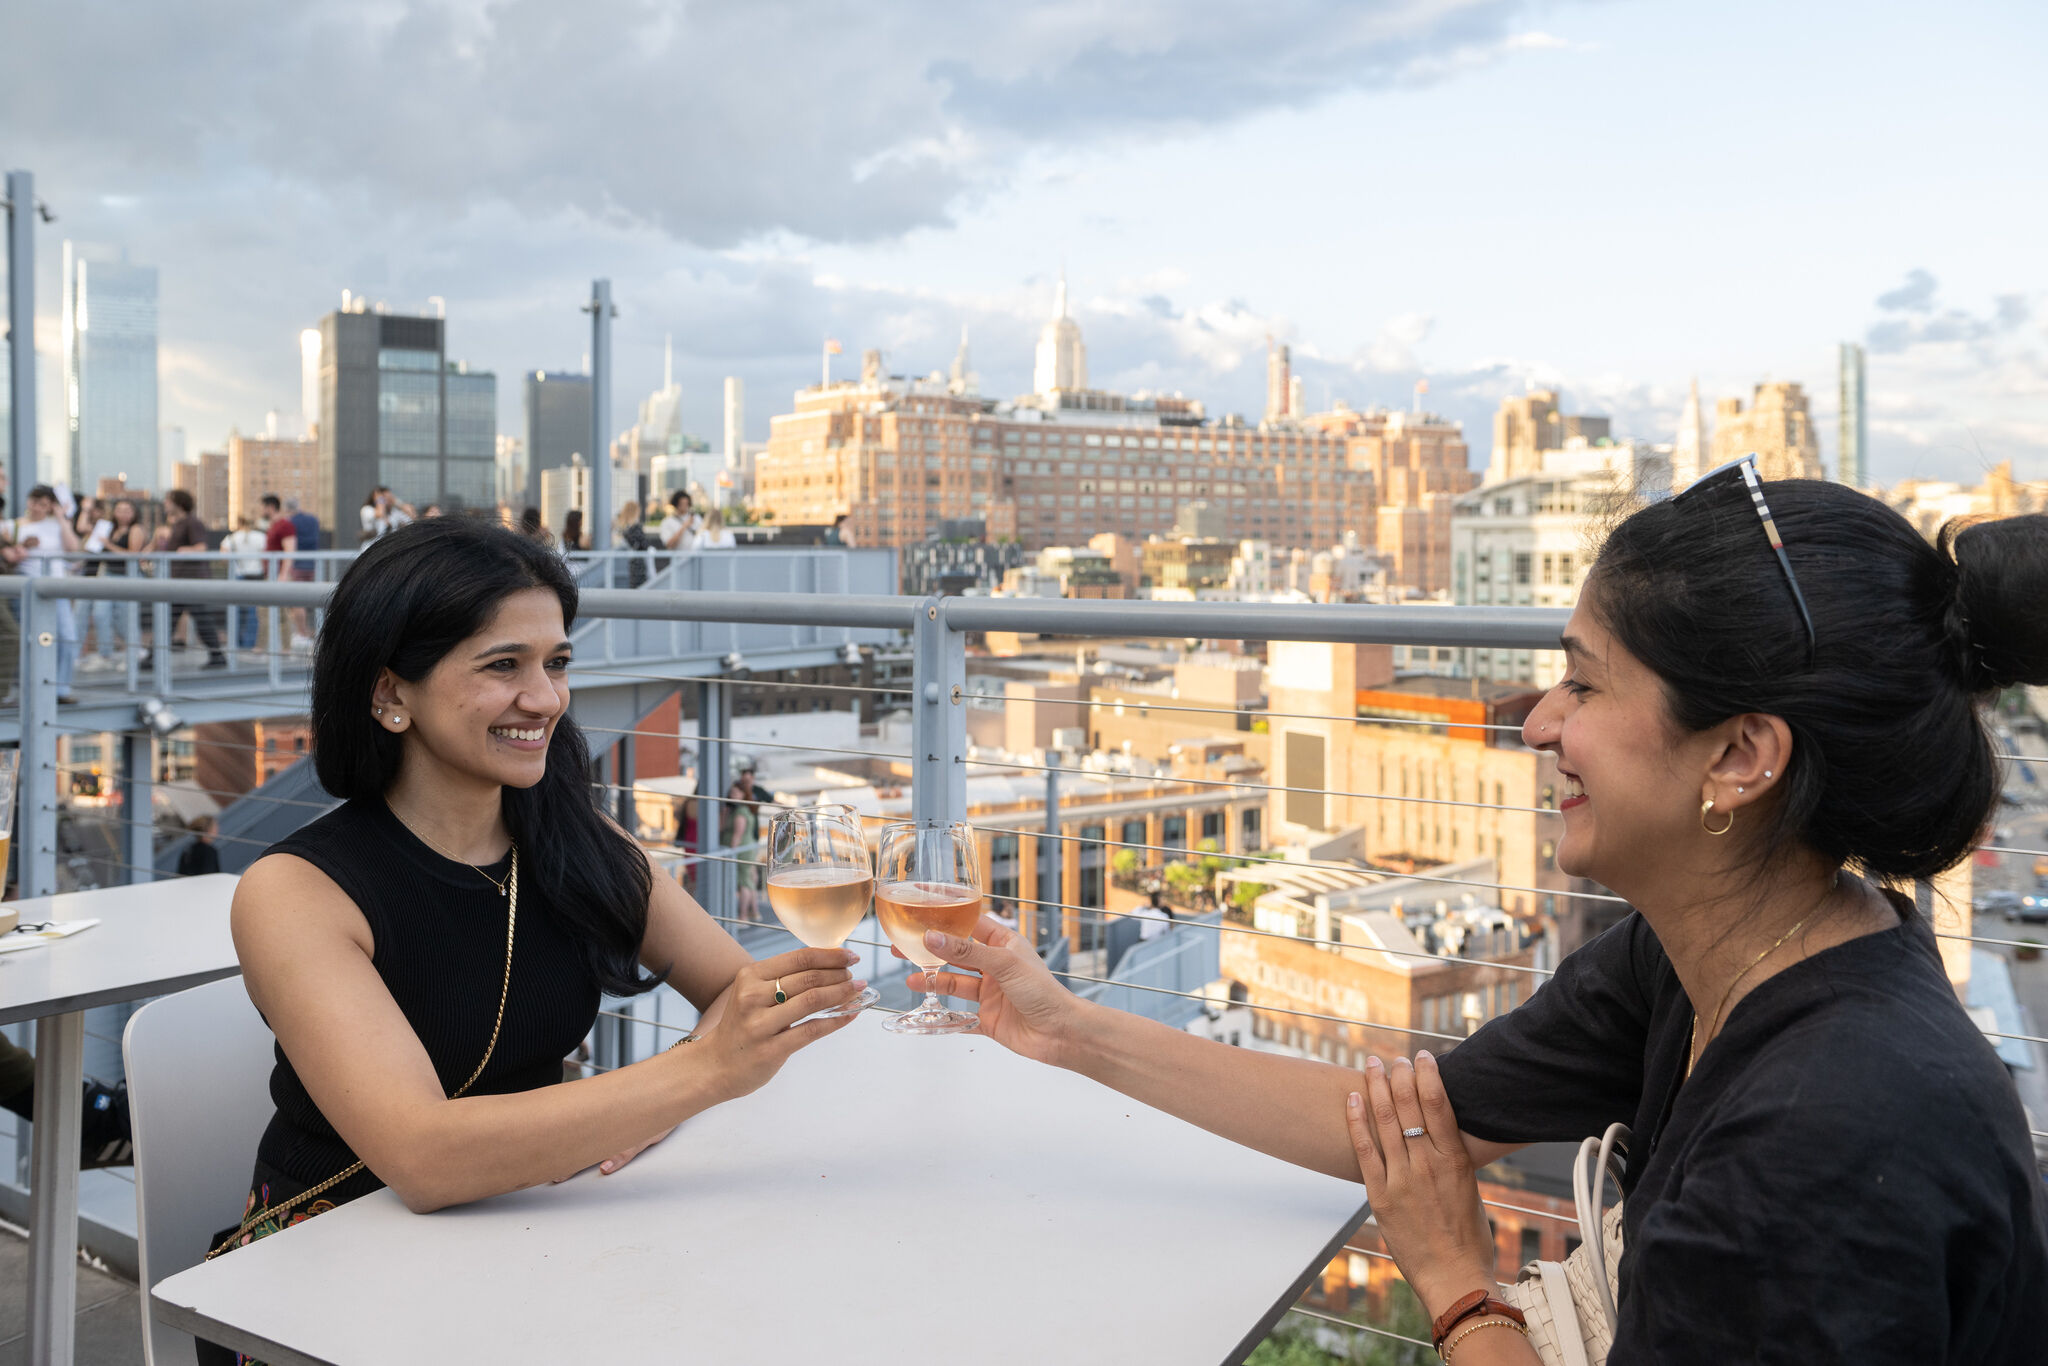 Two women clink glasses of rosé wine at a rooftop bar with a cityscape in the background.